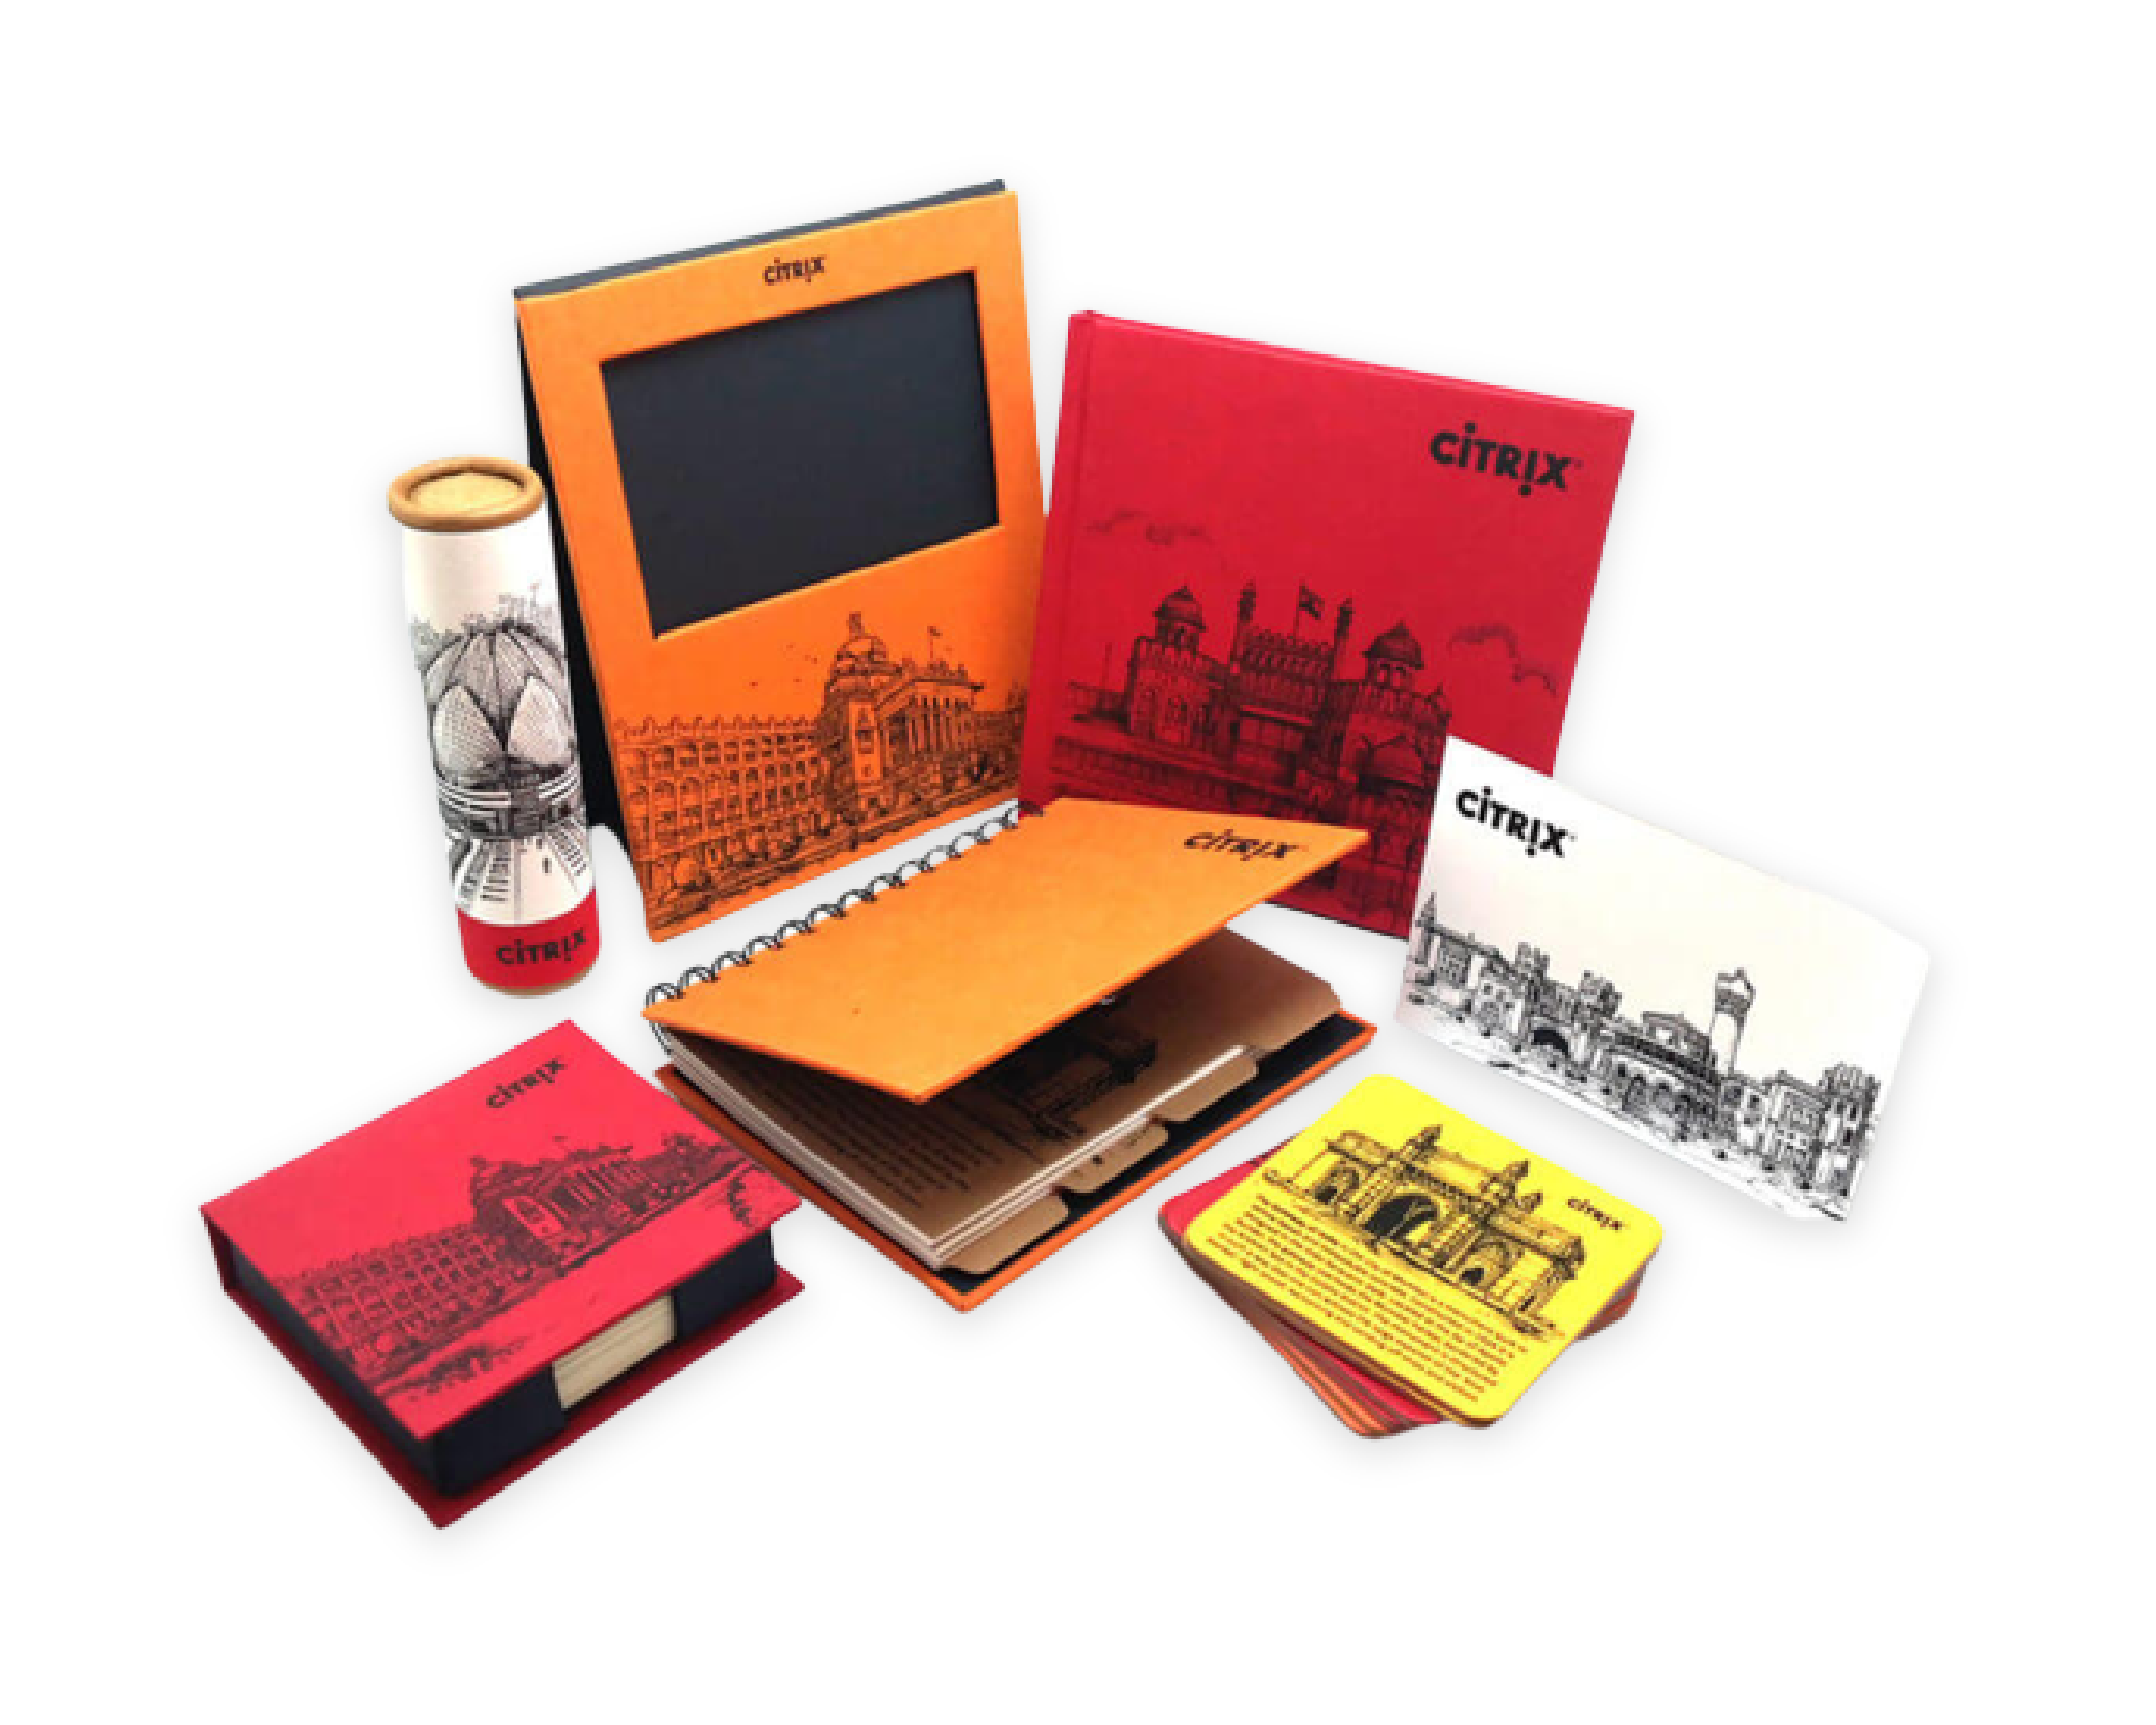 Corporate Diwali Gifts Set | Customized Corporate Gift Set of 4